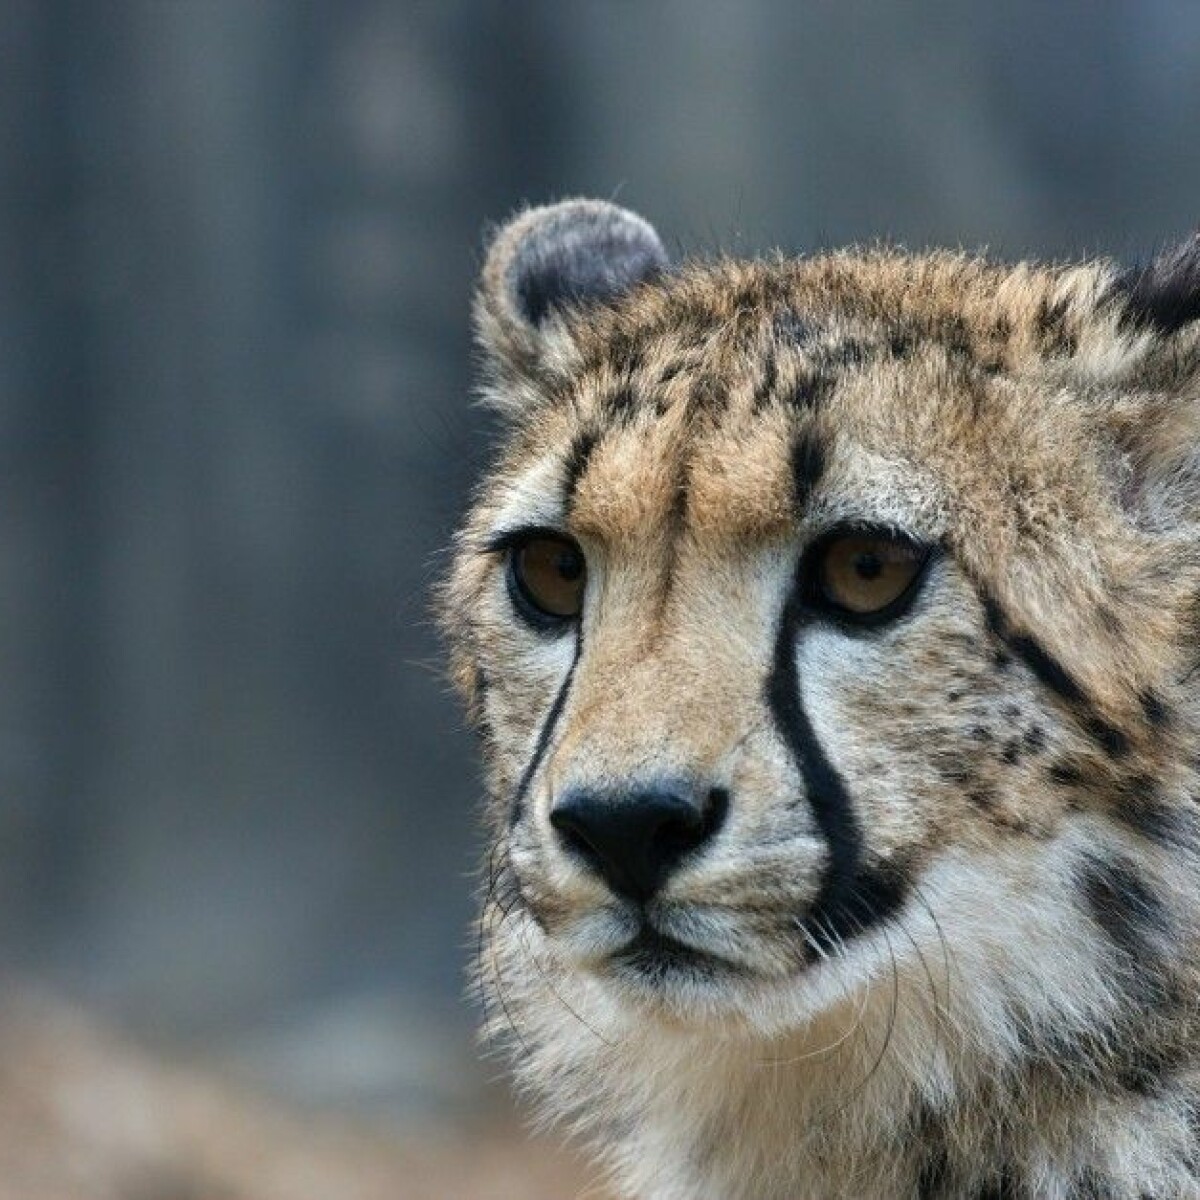 Can wild animals have mental illnesses?